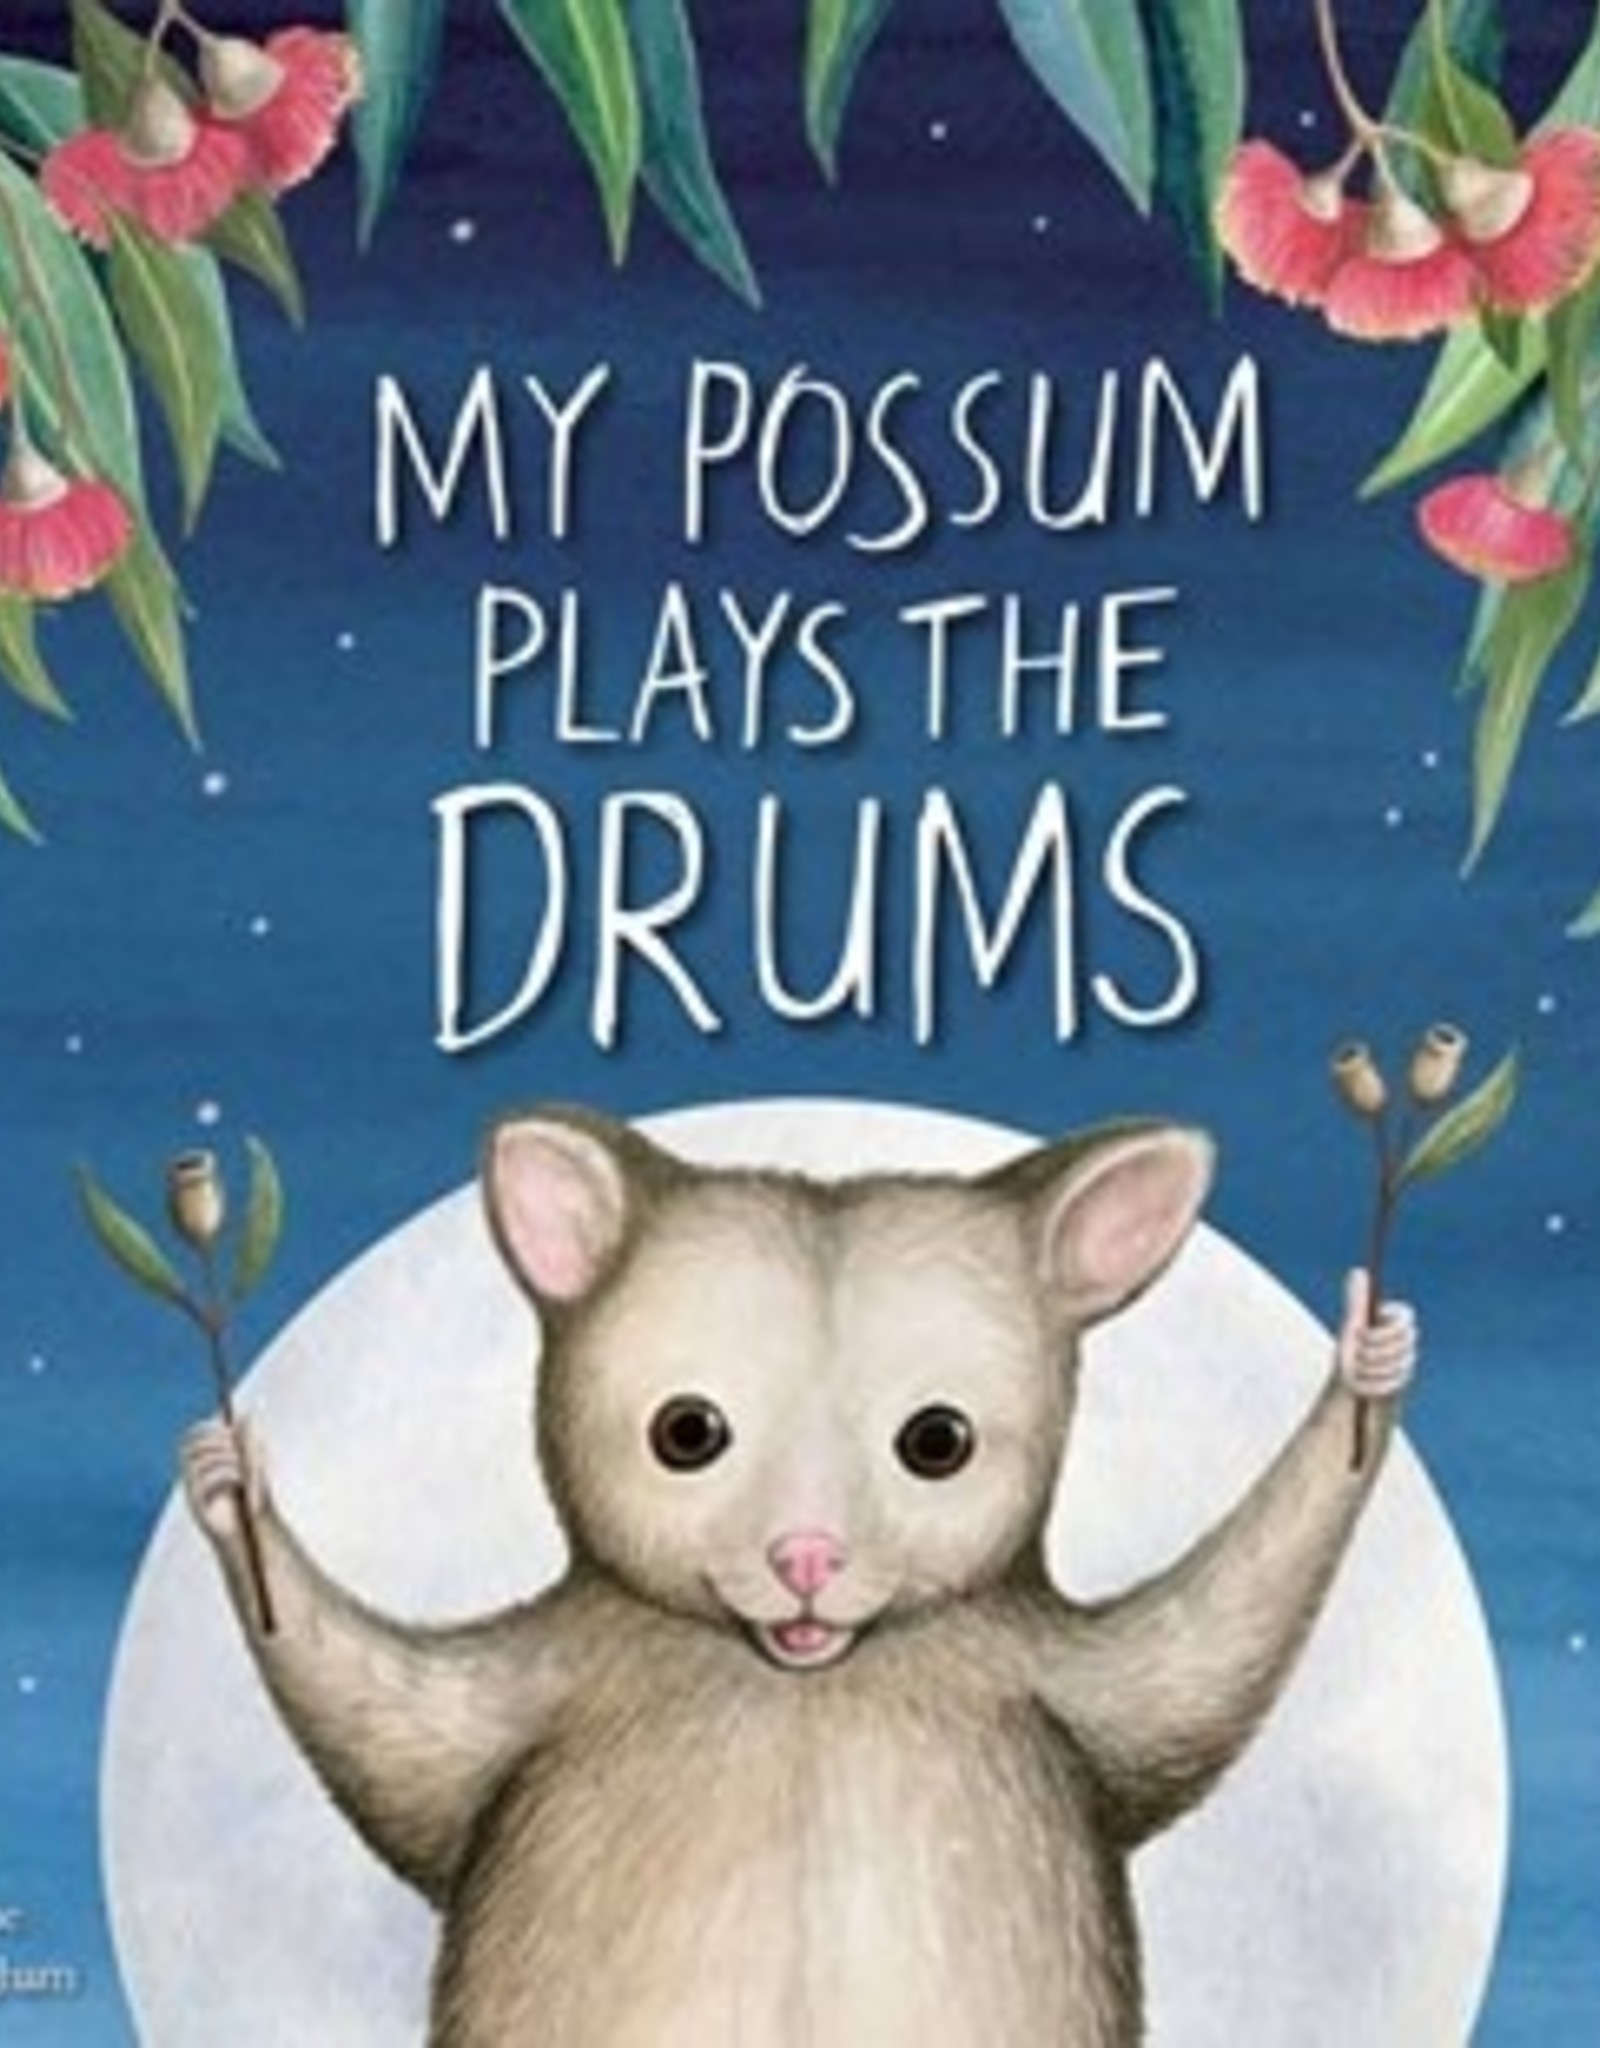 Book - My Possum Plays the Drums